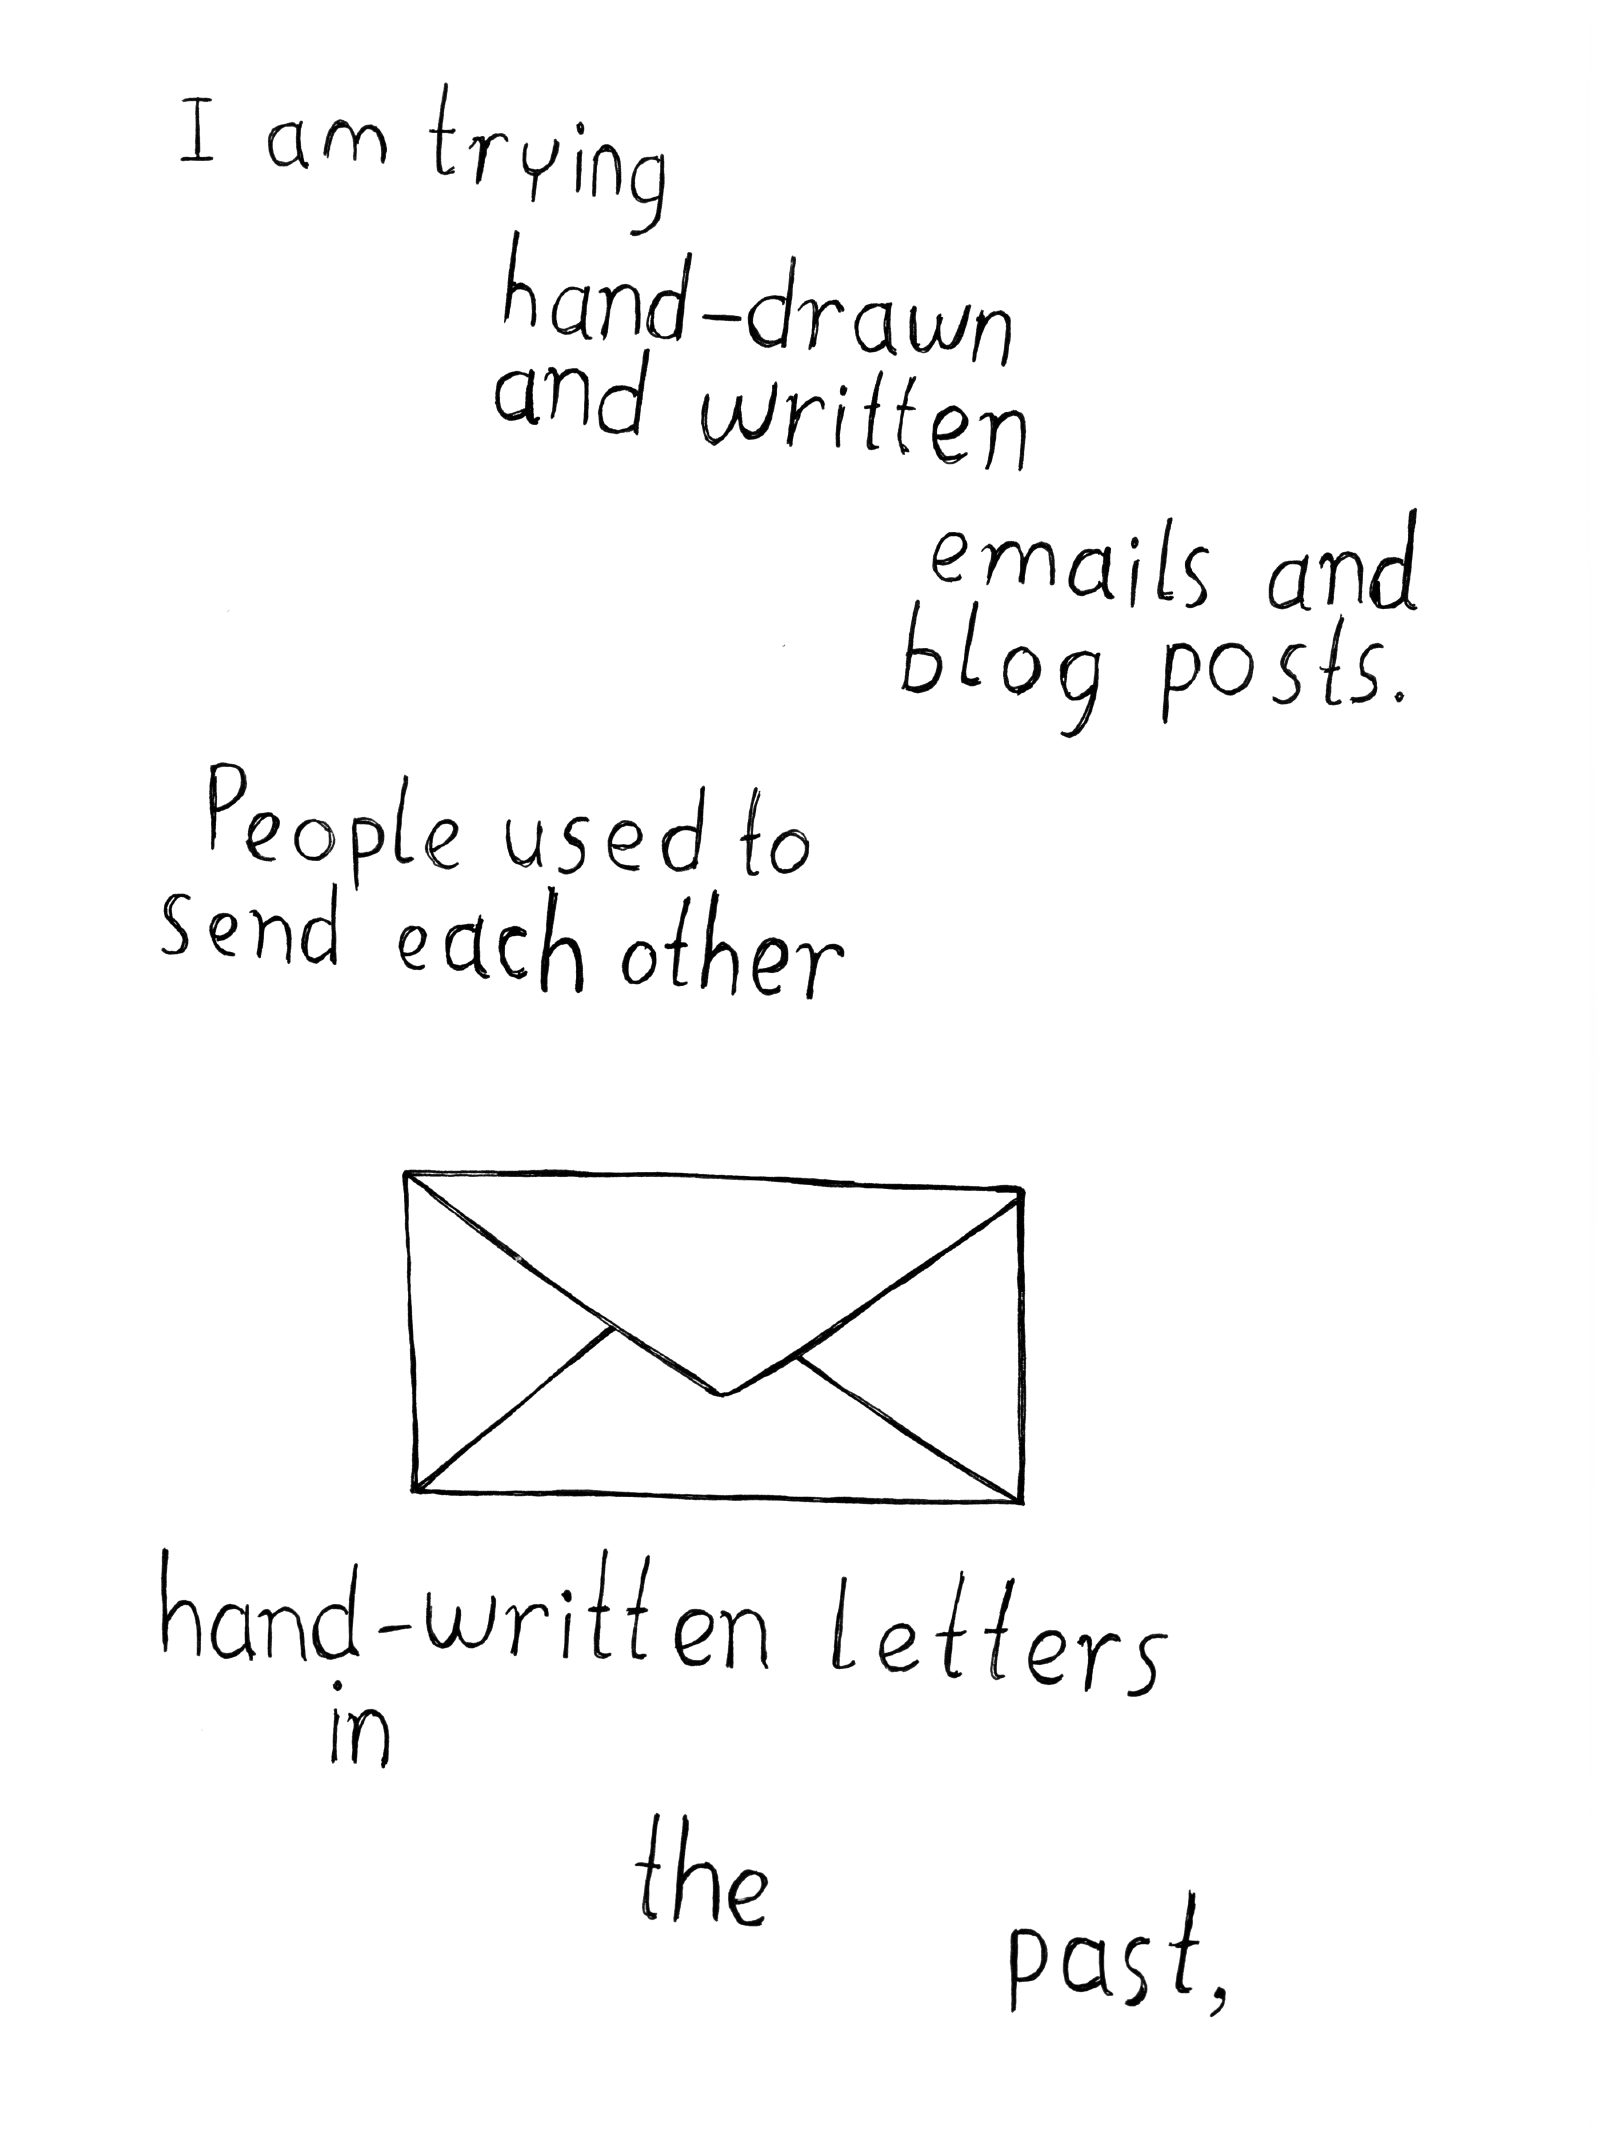 I am trying hand-drawn and written emails and blog posts. People used to send each other hand-written letters in the past